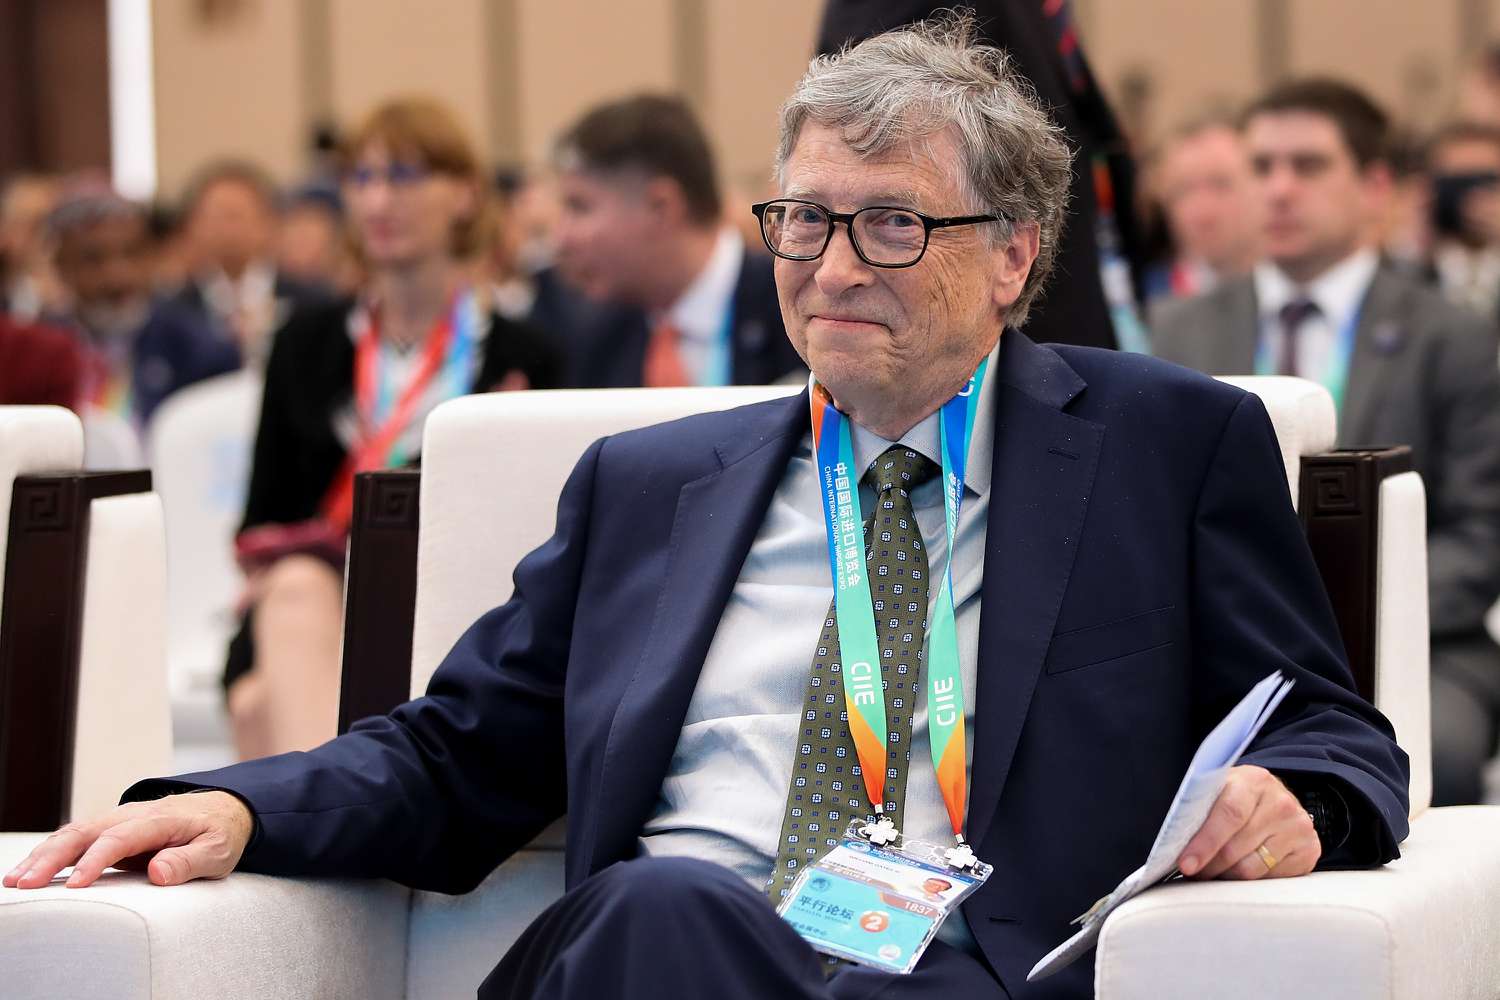 What Is Bill Gates’ Educational Background